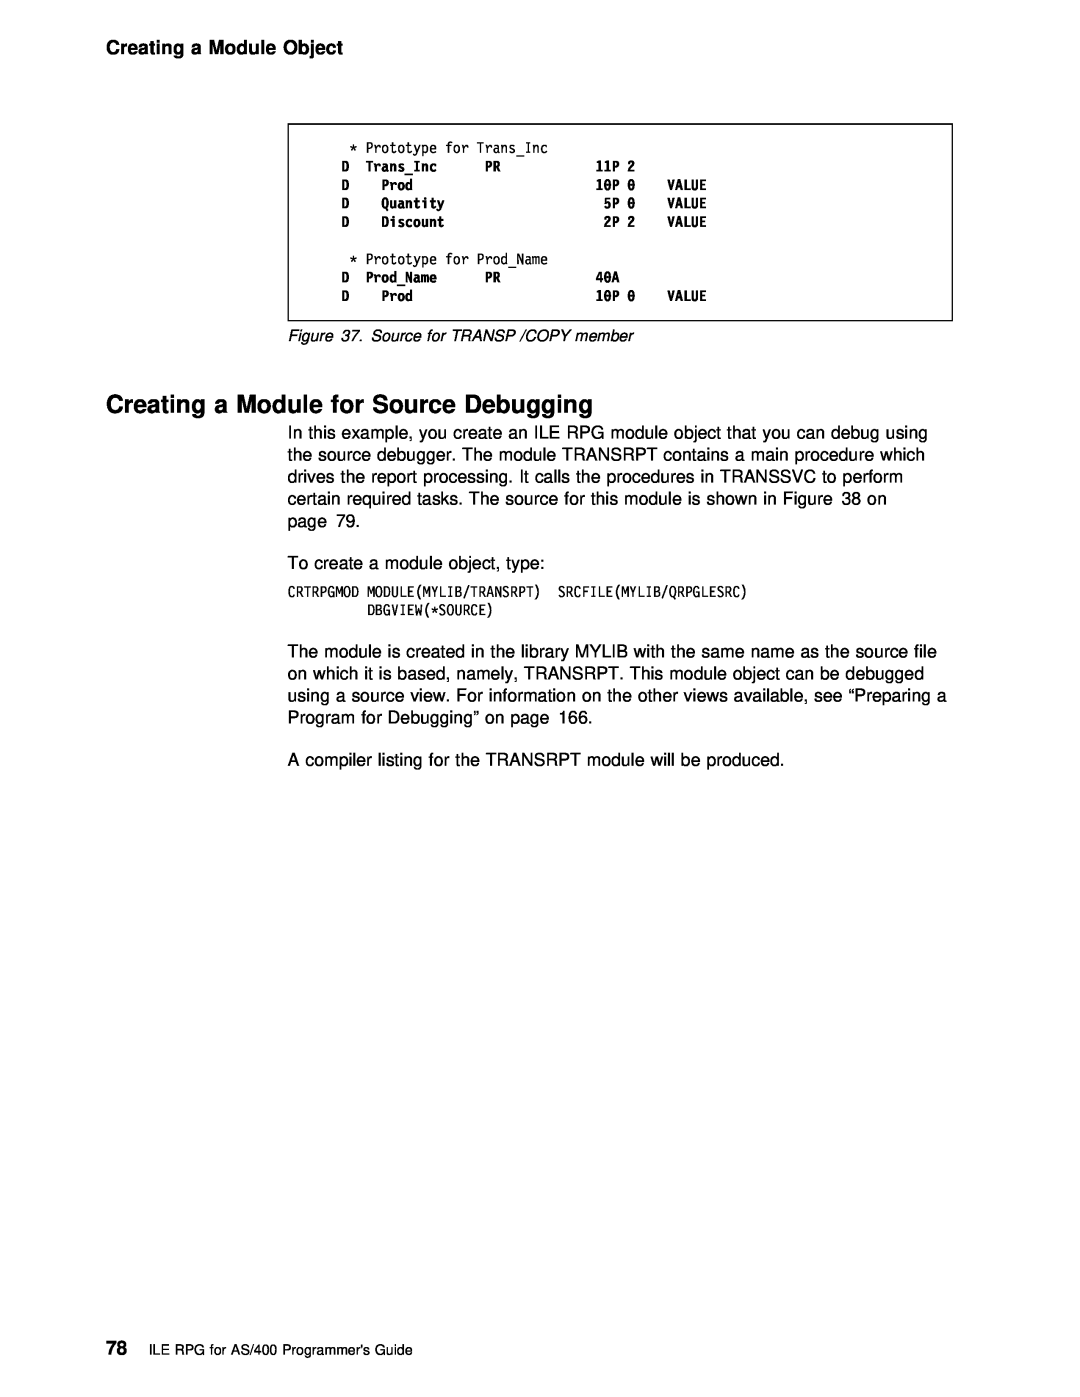 IBM AS/400 manual Creating a Module for, Creating a Module Object, Debugging 